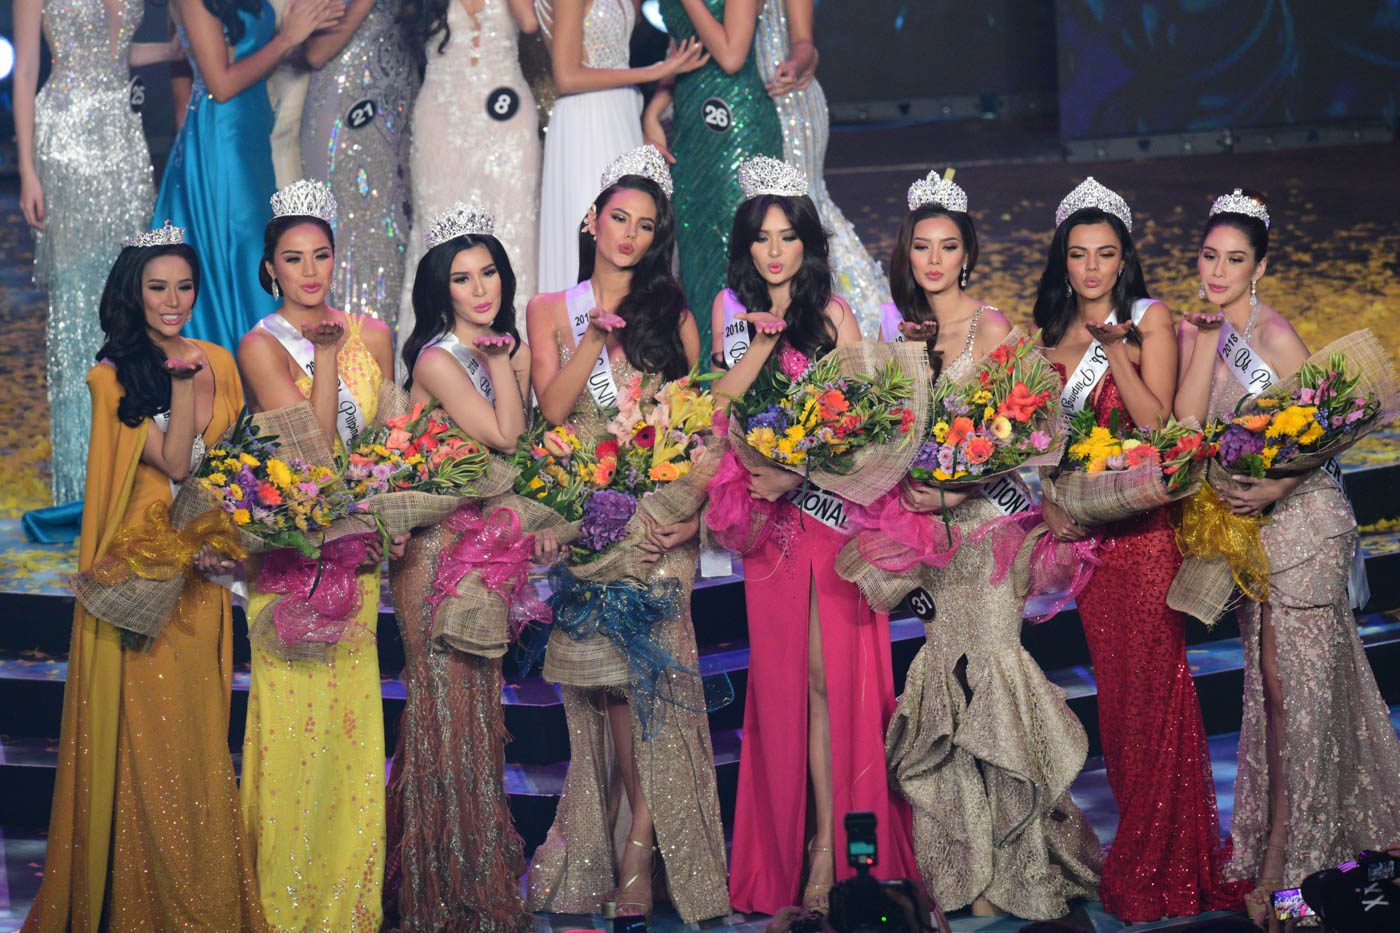 What you need to know about Binibining Pilipinas